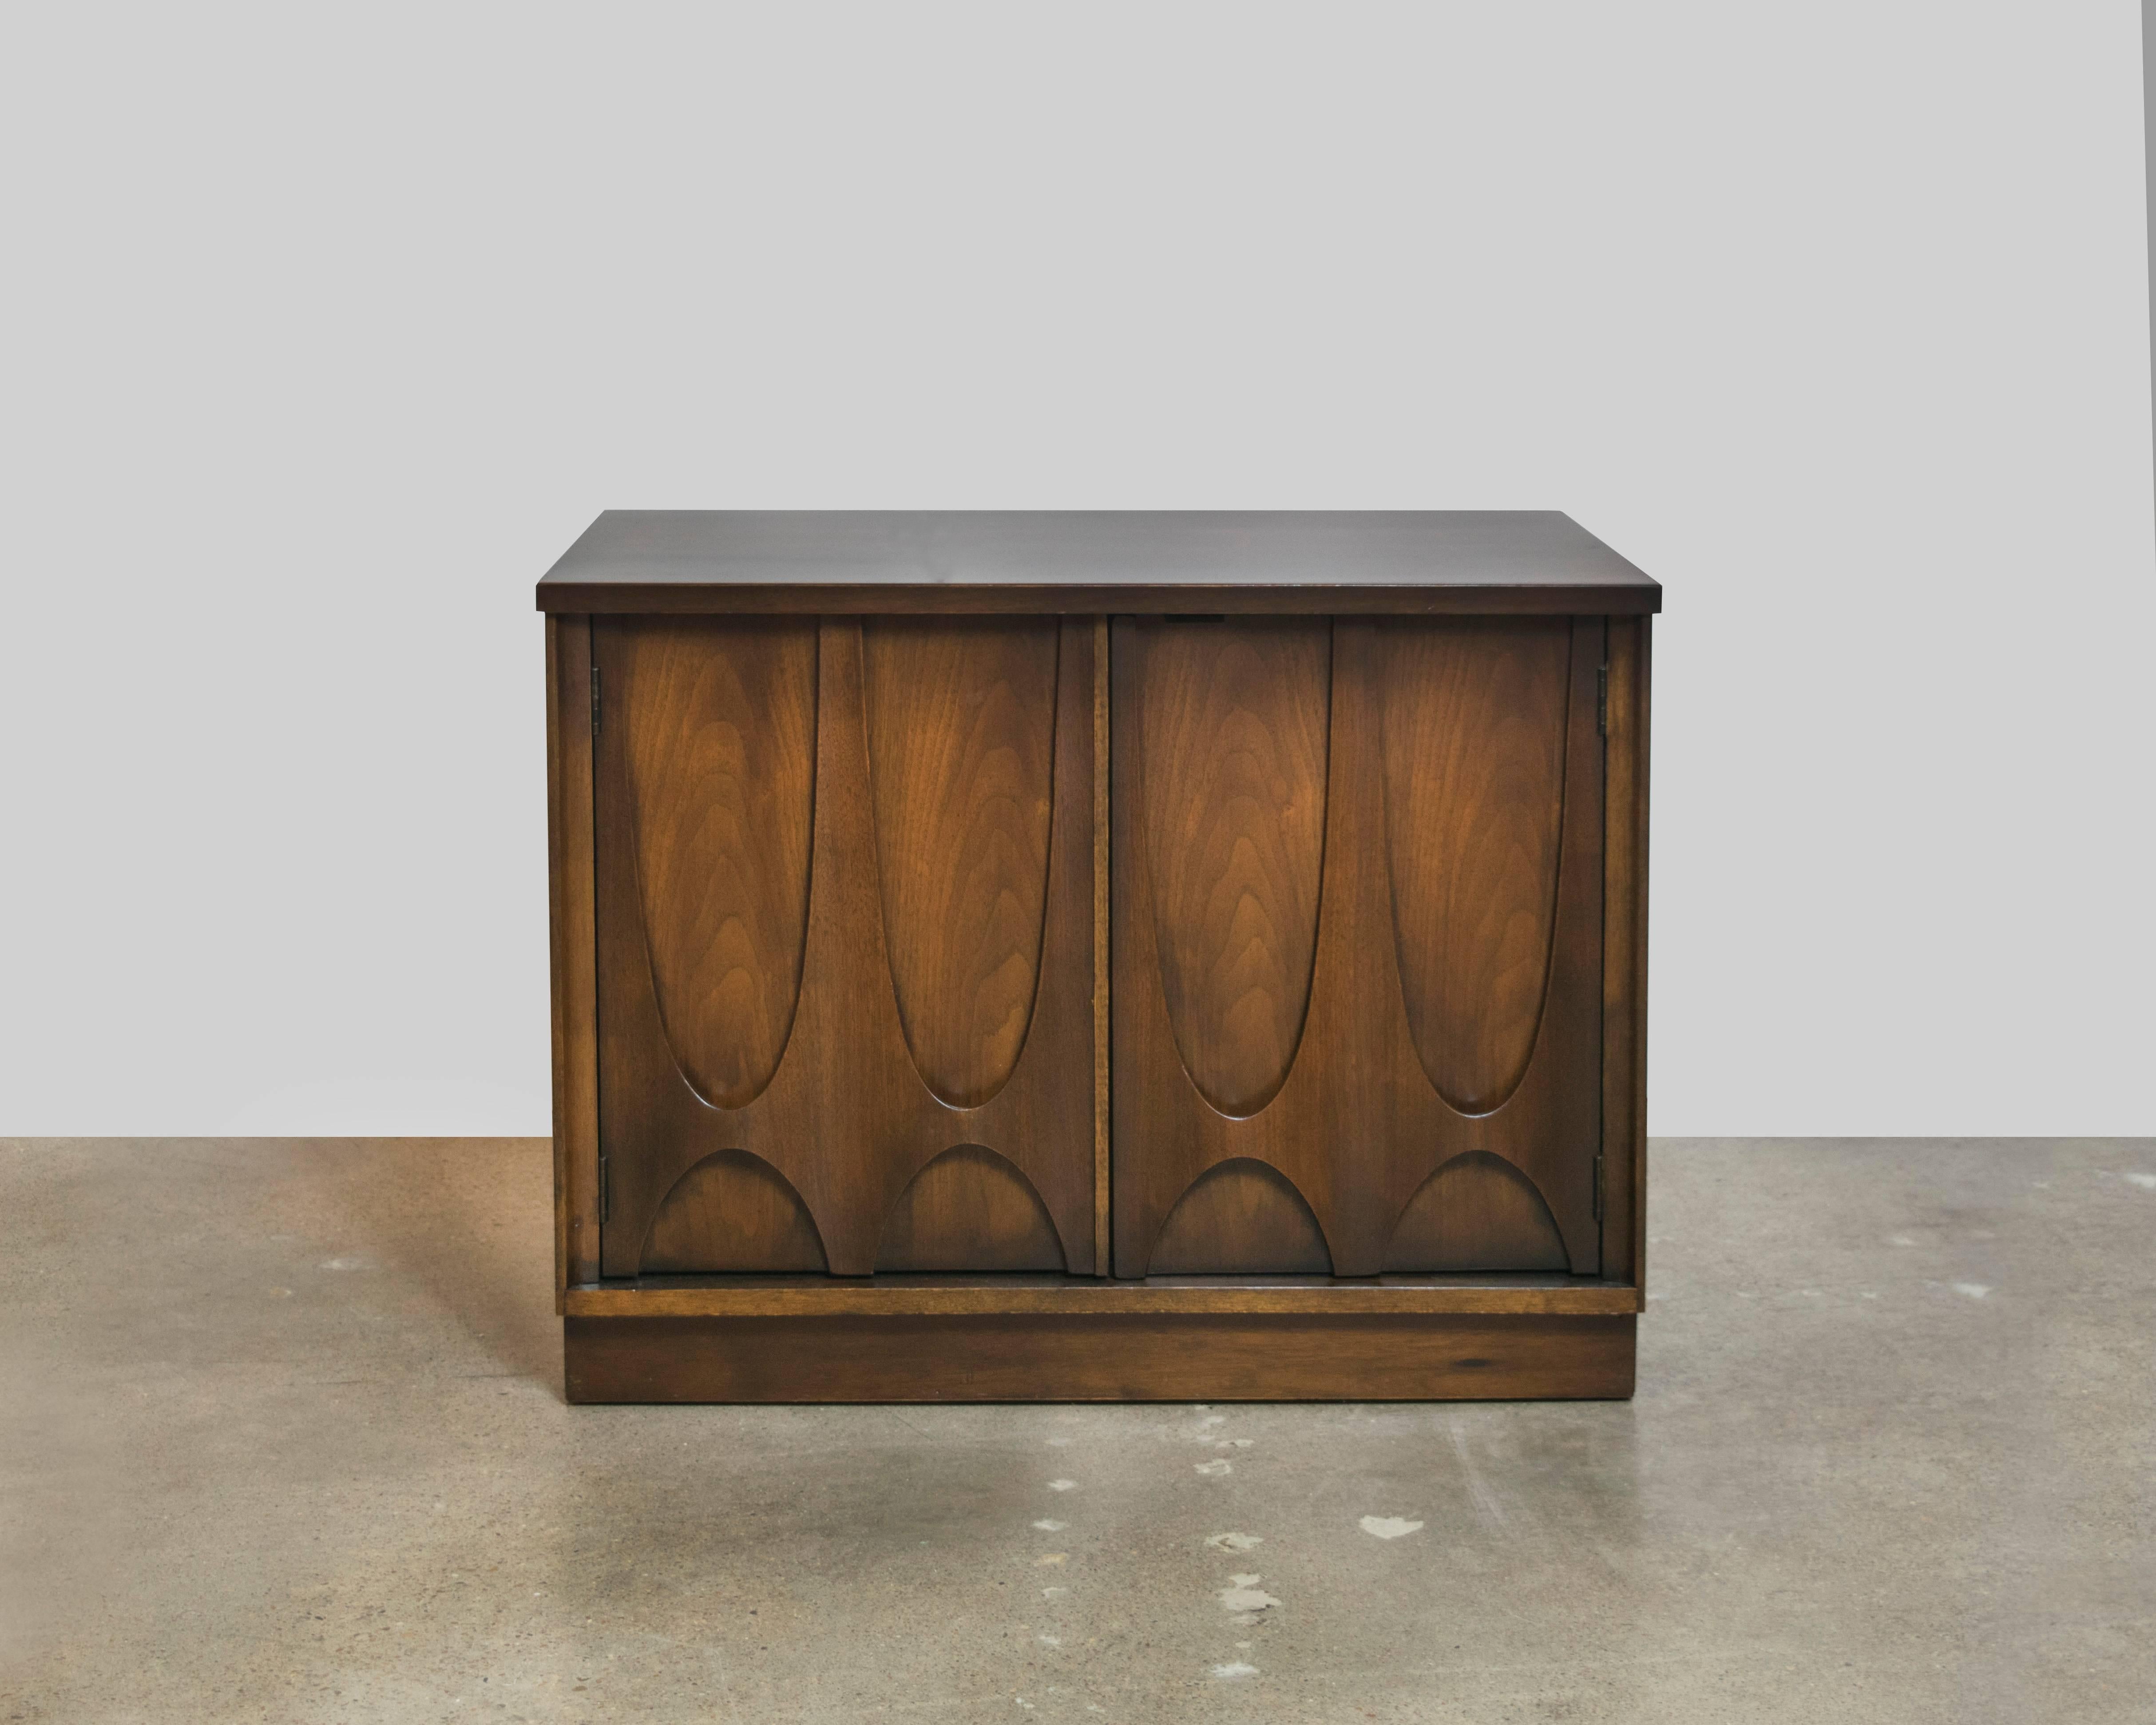 Quintessential Mid-Century Modern at its finest, these Brasilia walnut nightstands or end tables by Broyhill are a prime example of 1950s-1960s Futura design and architecture.